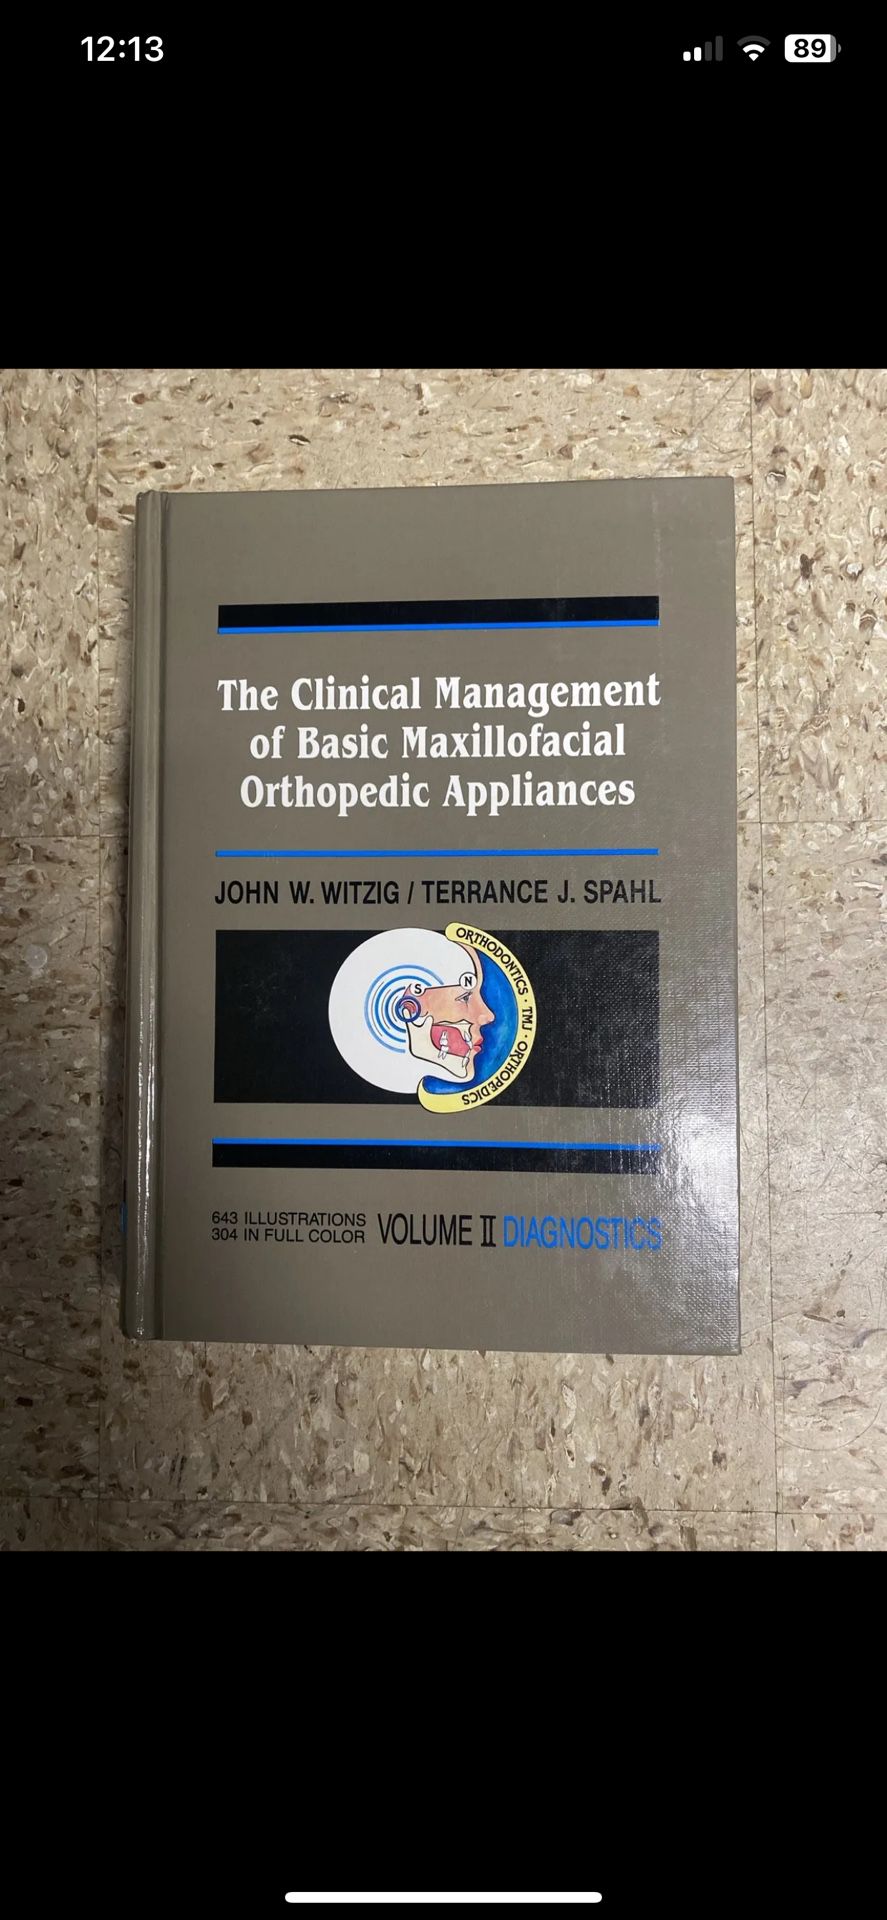 The Clinical Management of Basic Maxillofacial Orthopedic Appliances Dentistry